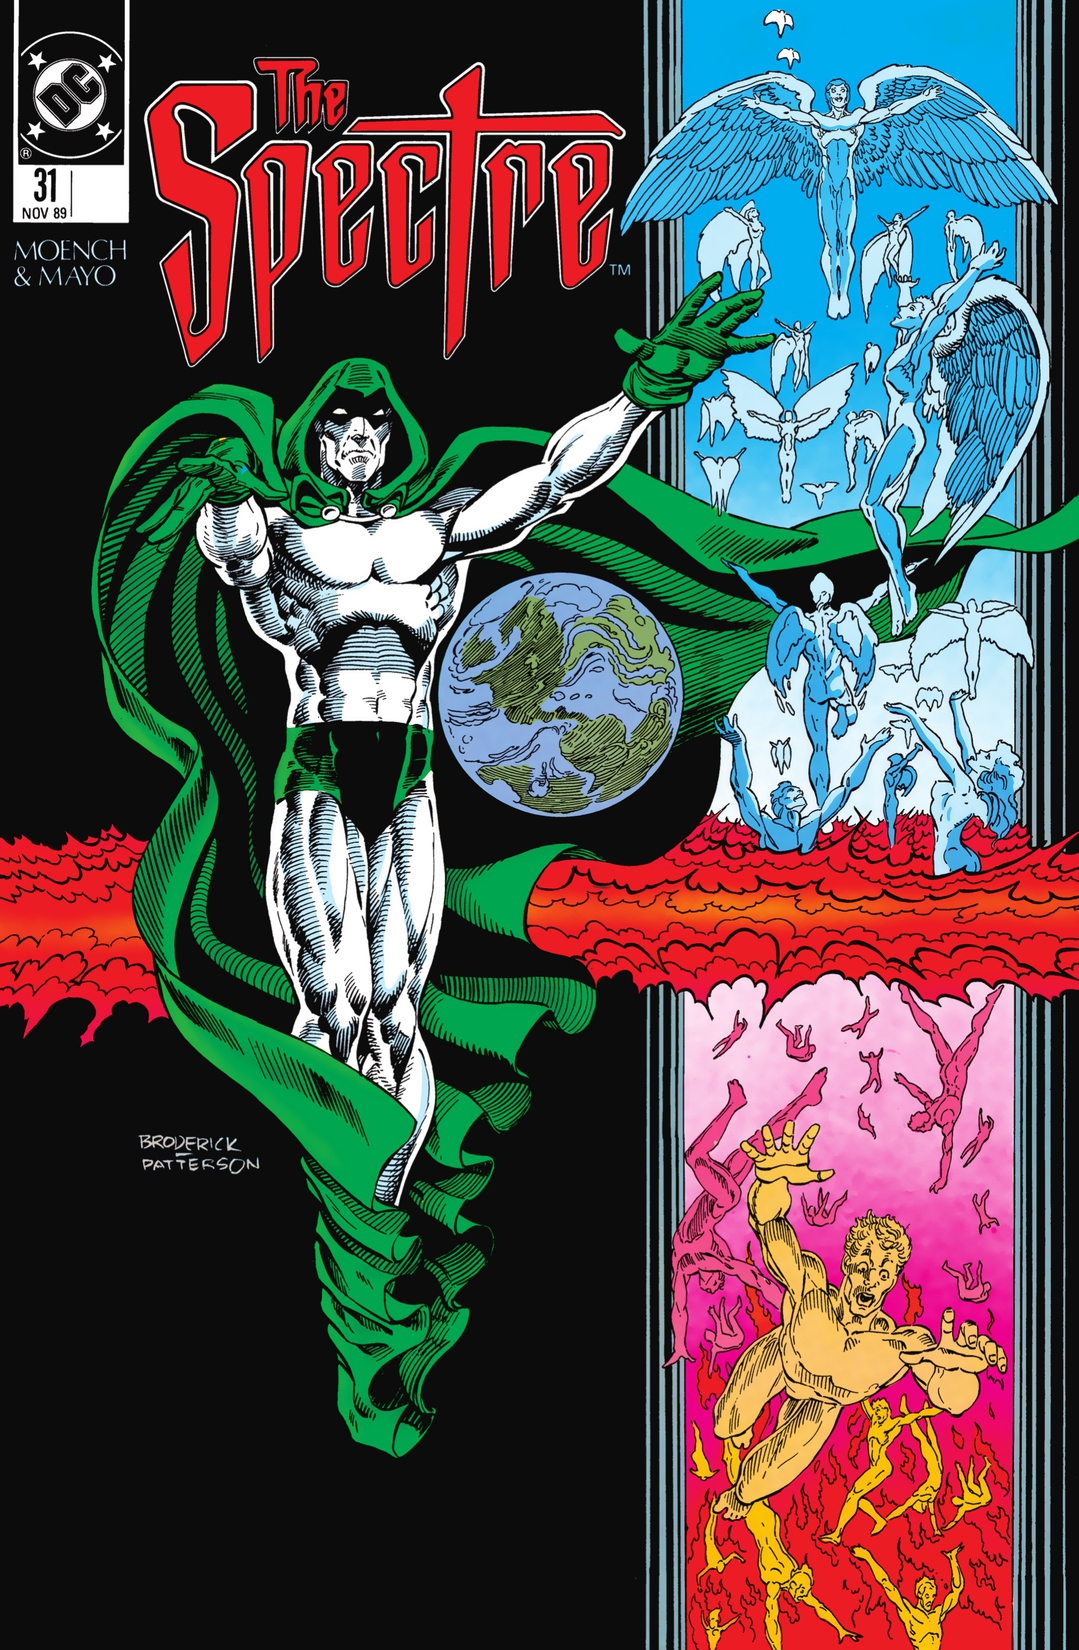 The Spectre (1987-) #31 preview images